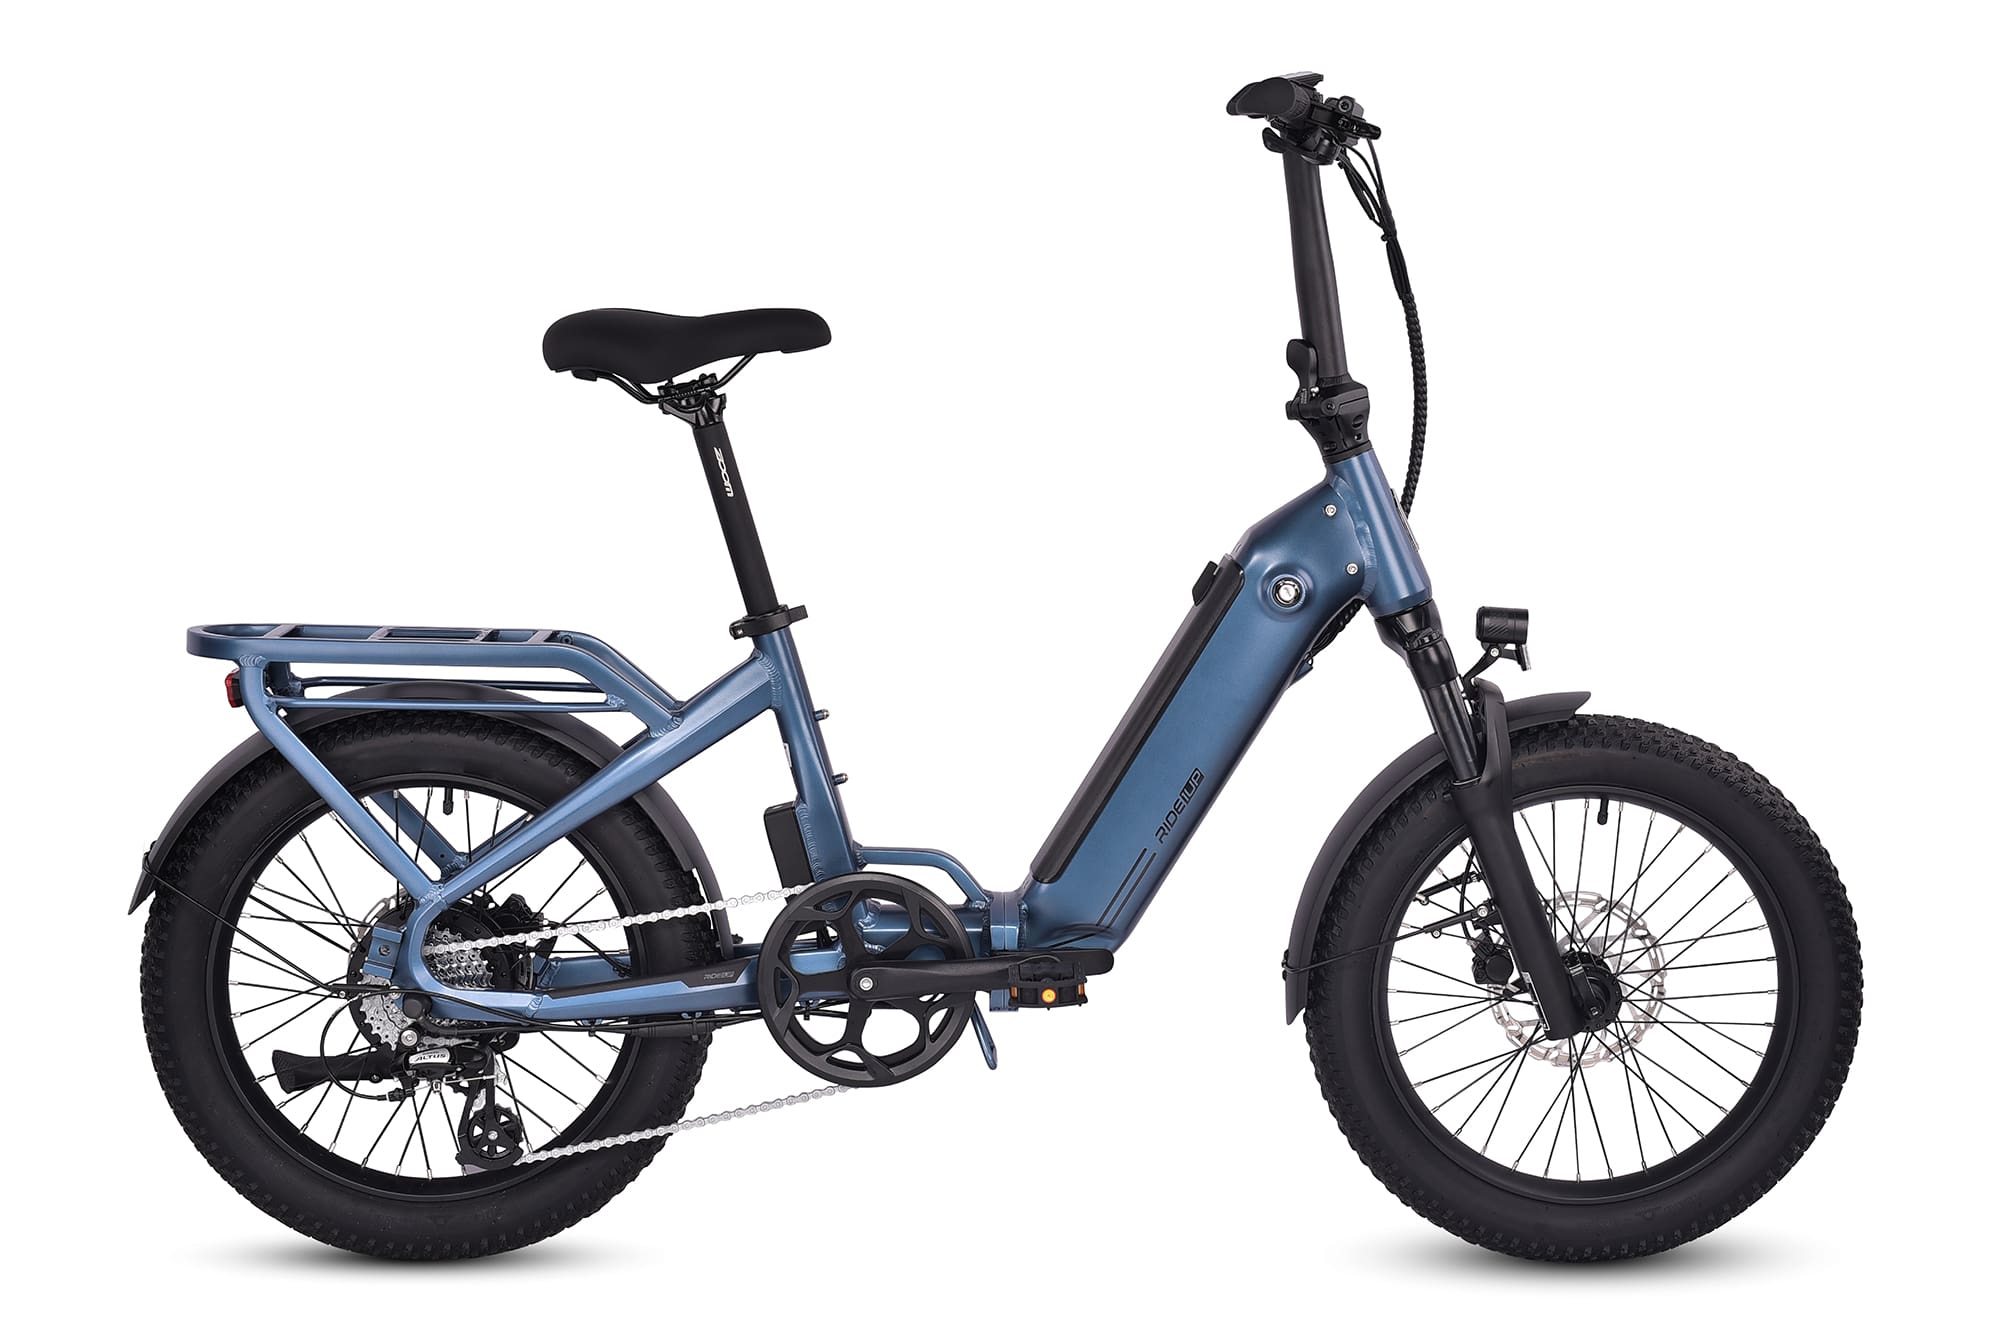 Motor Power: 750W<br>Speed: 28mph/20mph<br>Range: 20-45 miles<br>Battery: 48V 10.4Ah/13.4Ah options<br>Payload Capacity: 130 lbs